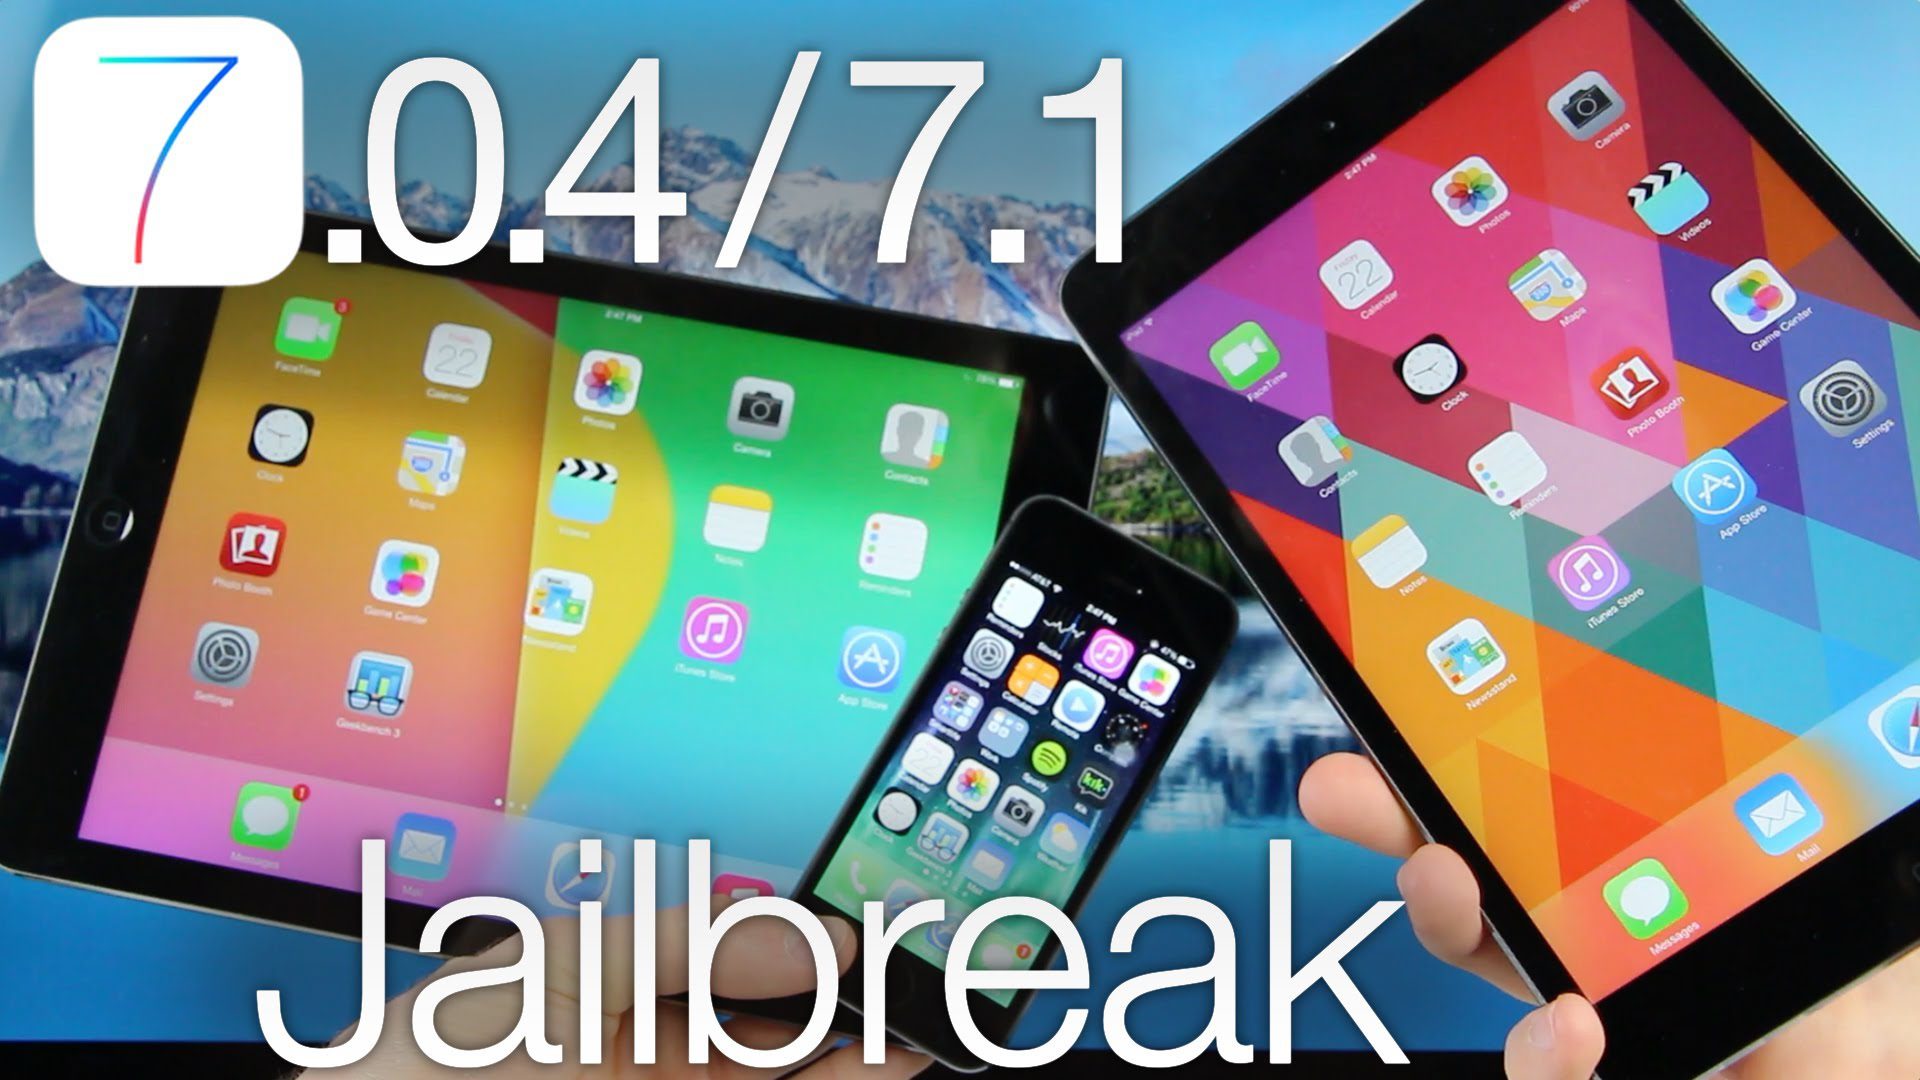 iOS 7.1 jailbroken but only on the iPhone 4